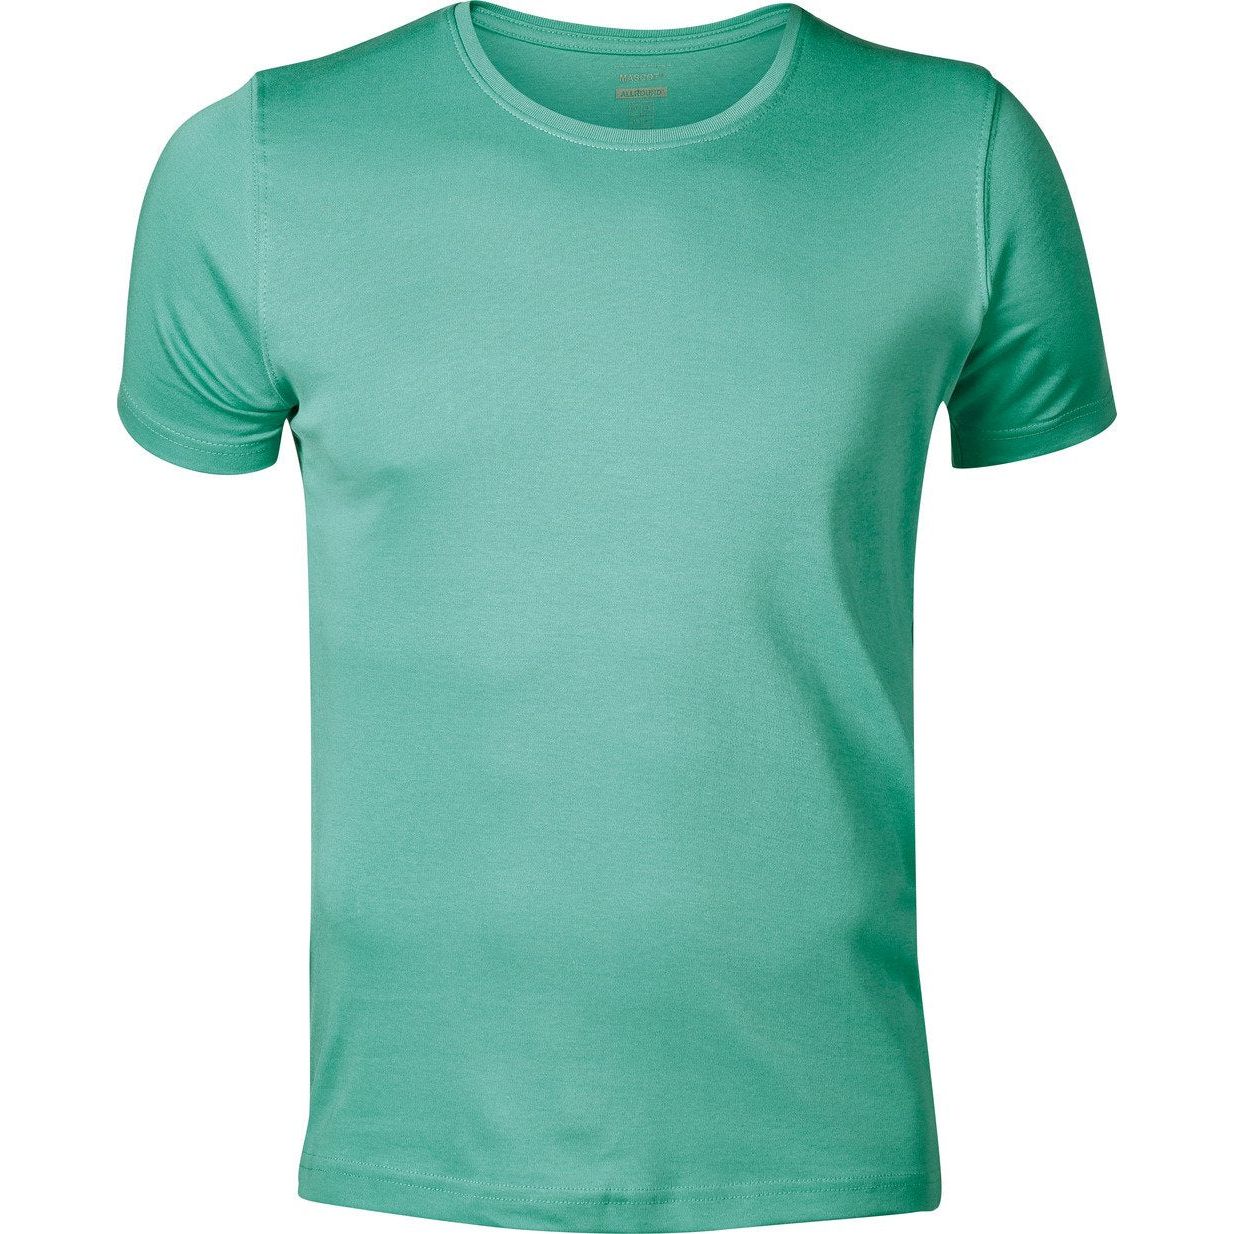 Mascot Vence T-shirt Slim-Fit Dusty Turquoise 51585-967-94 Front